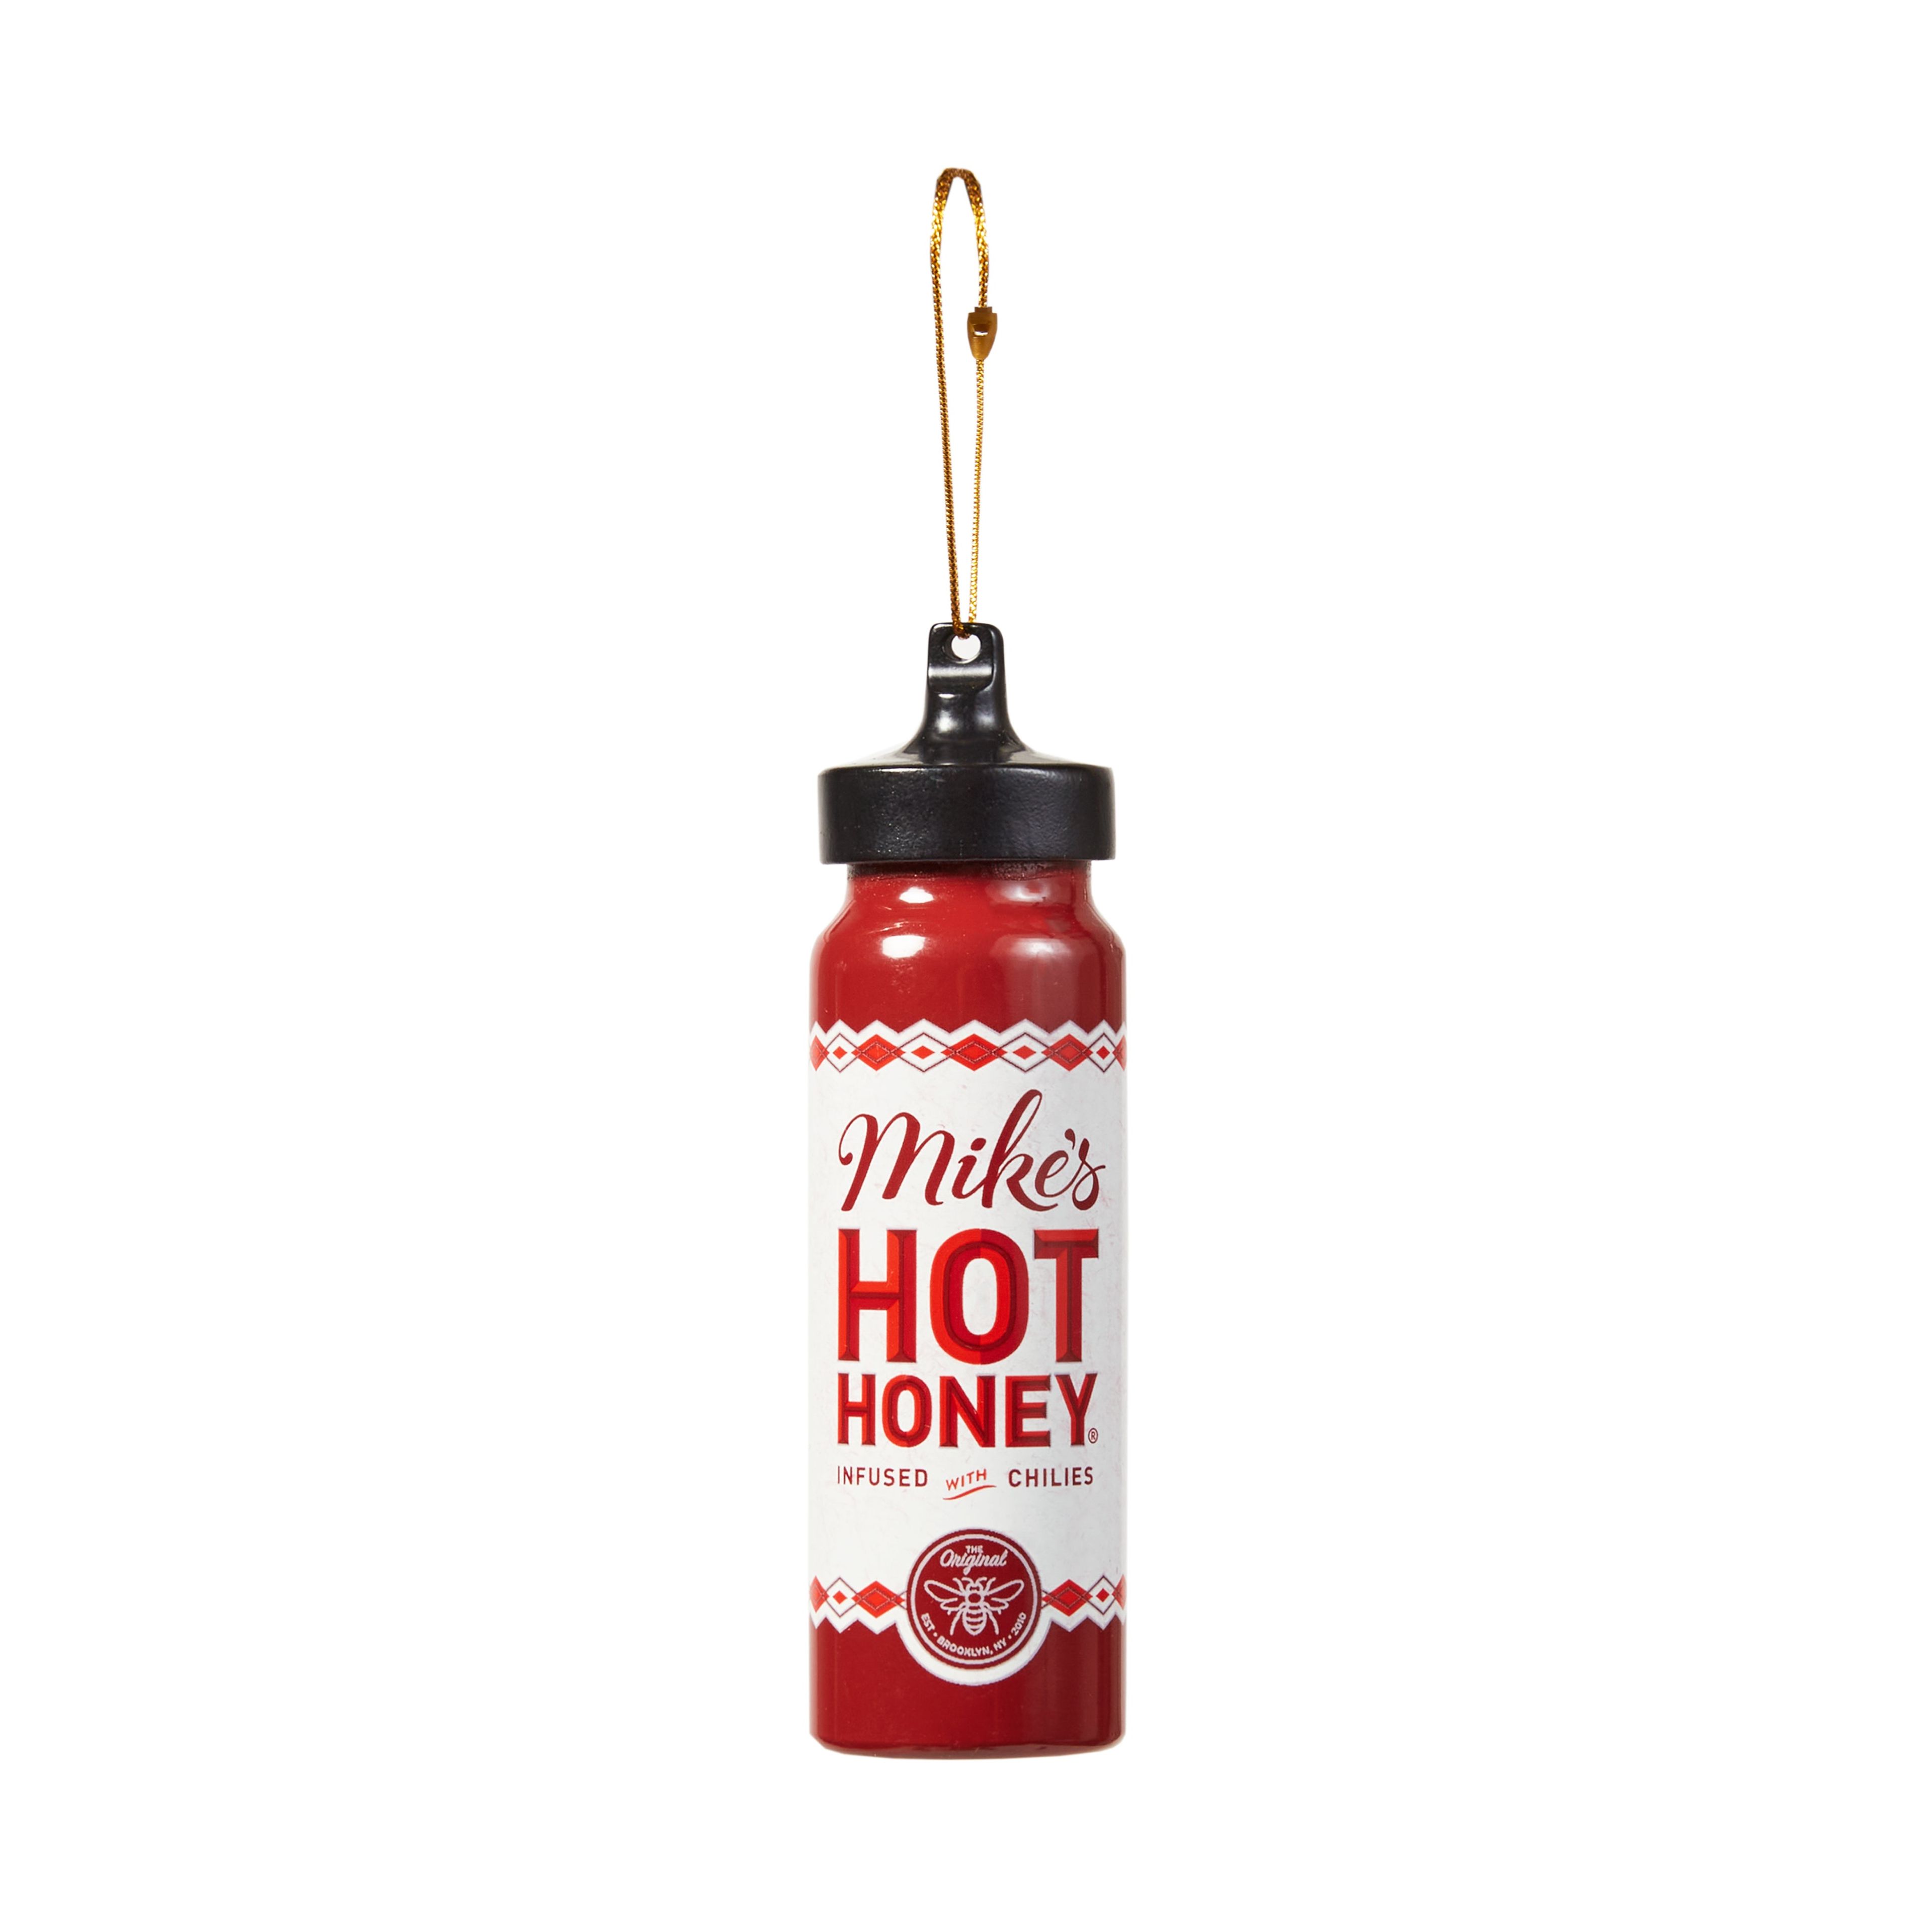 Mike's Hot Honey Holiday Ornament